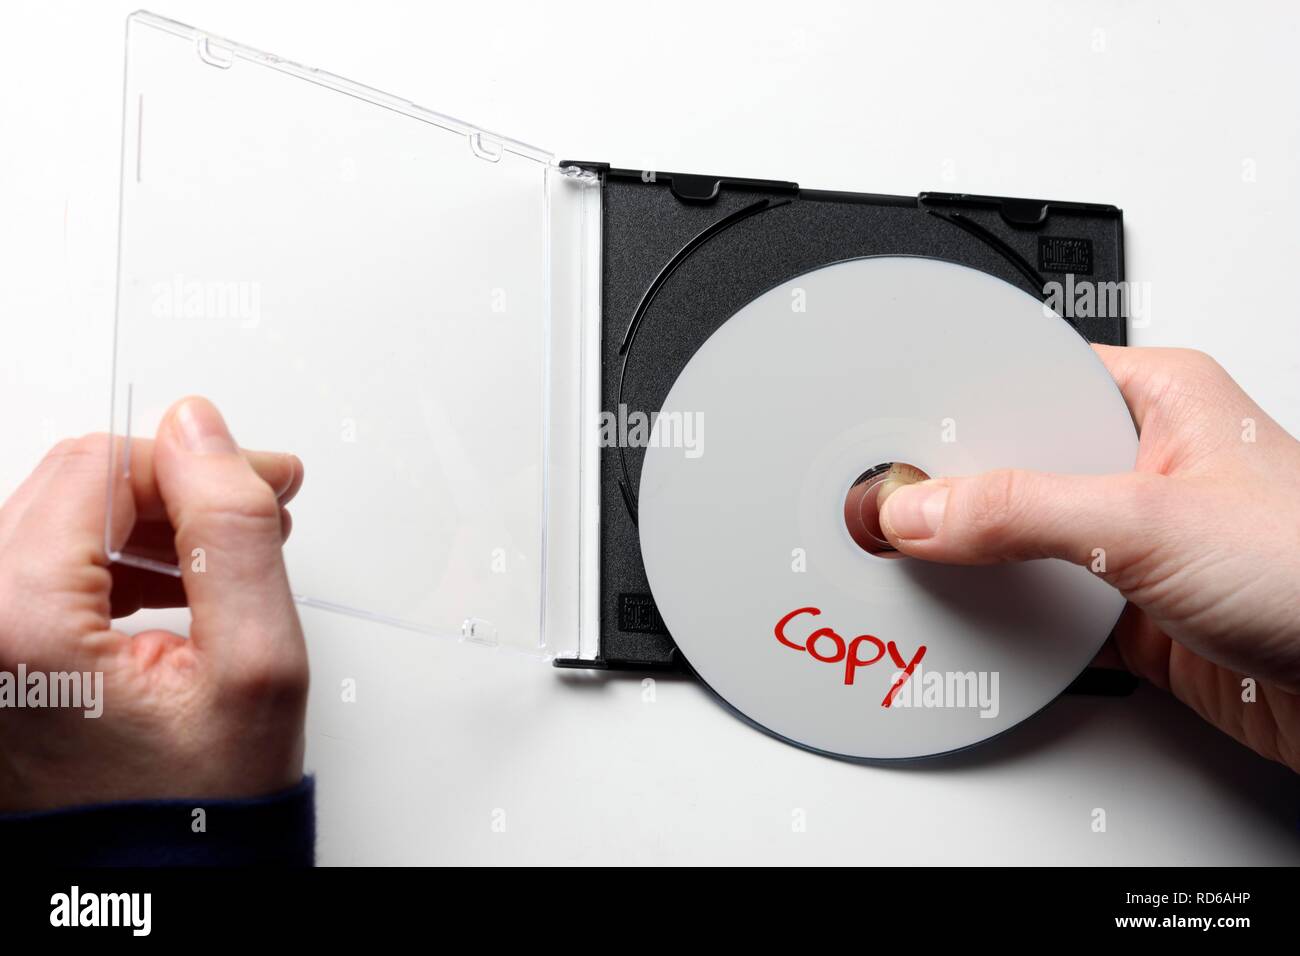 Hands holding a CD or DVD labeled copy Stock Photo